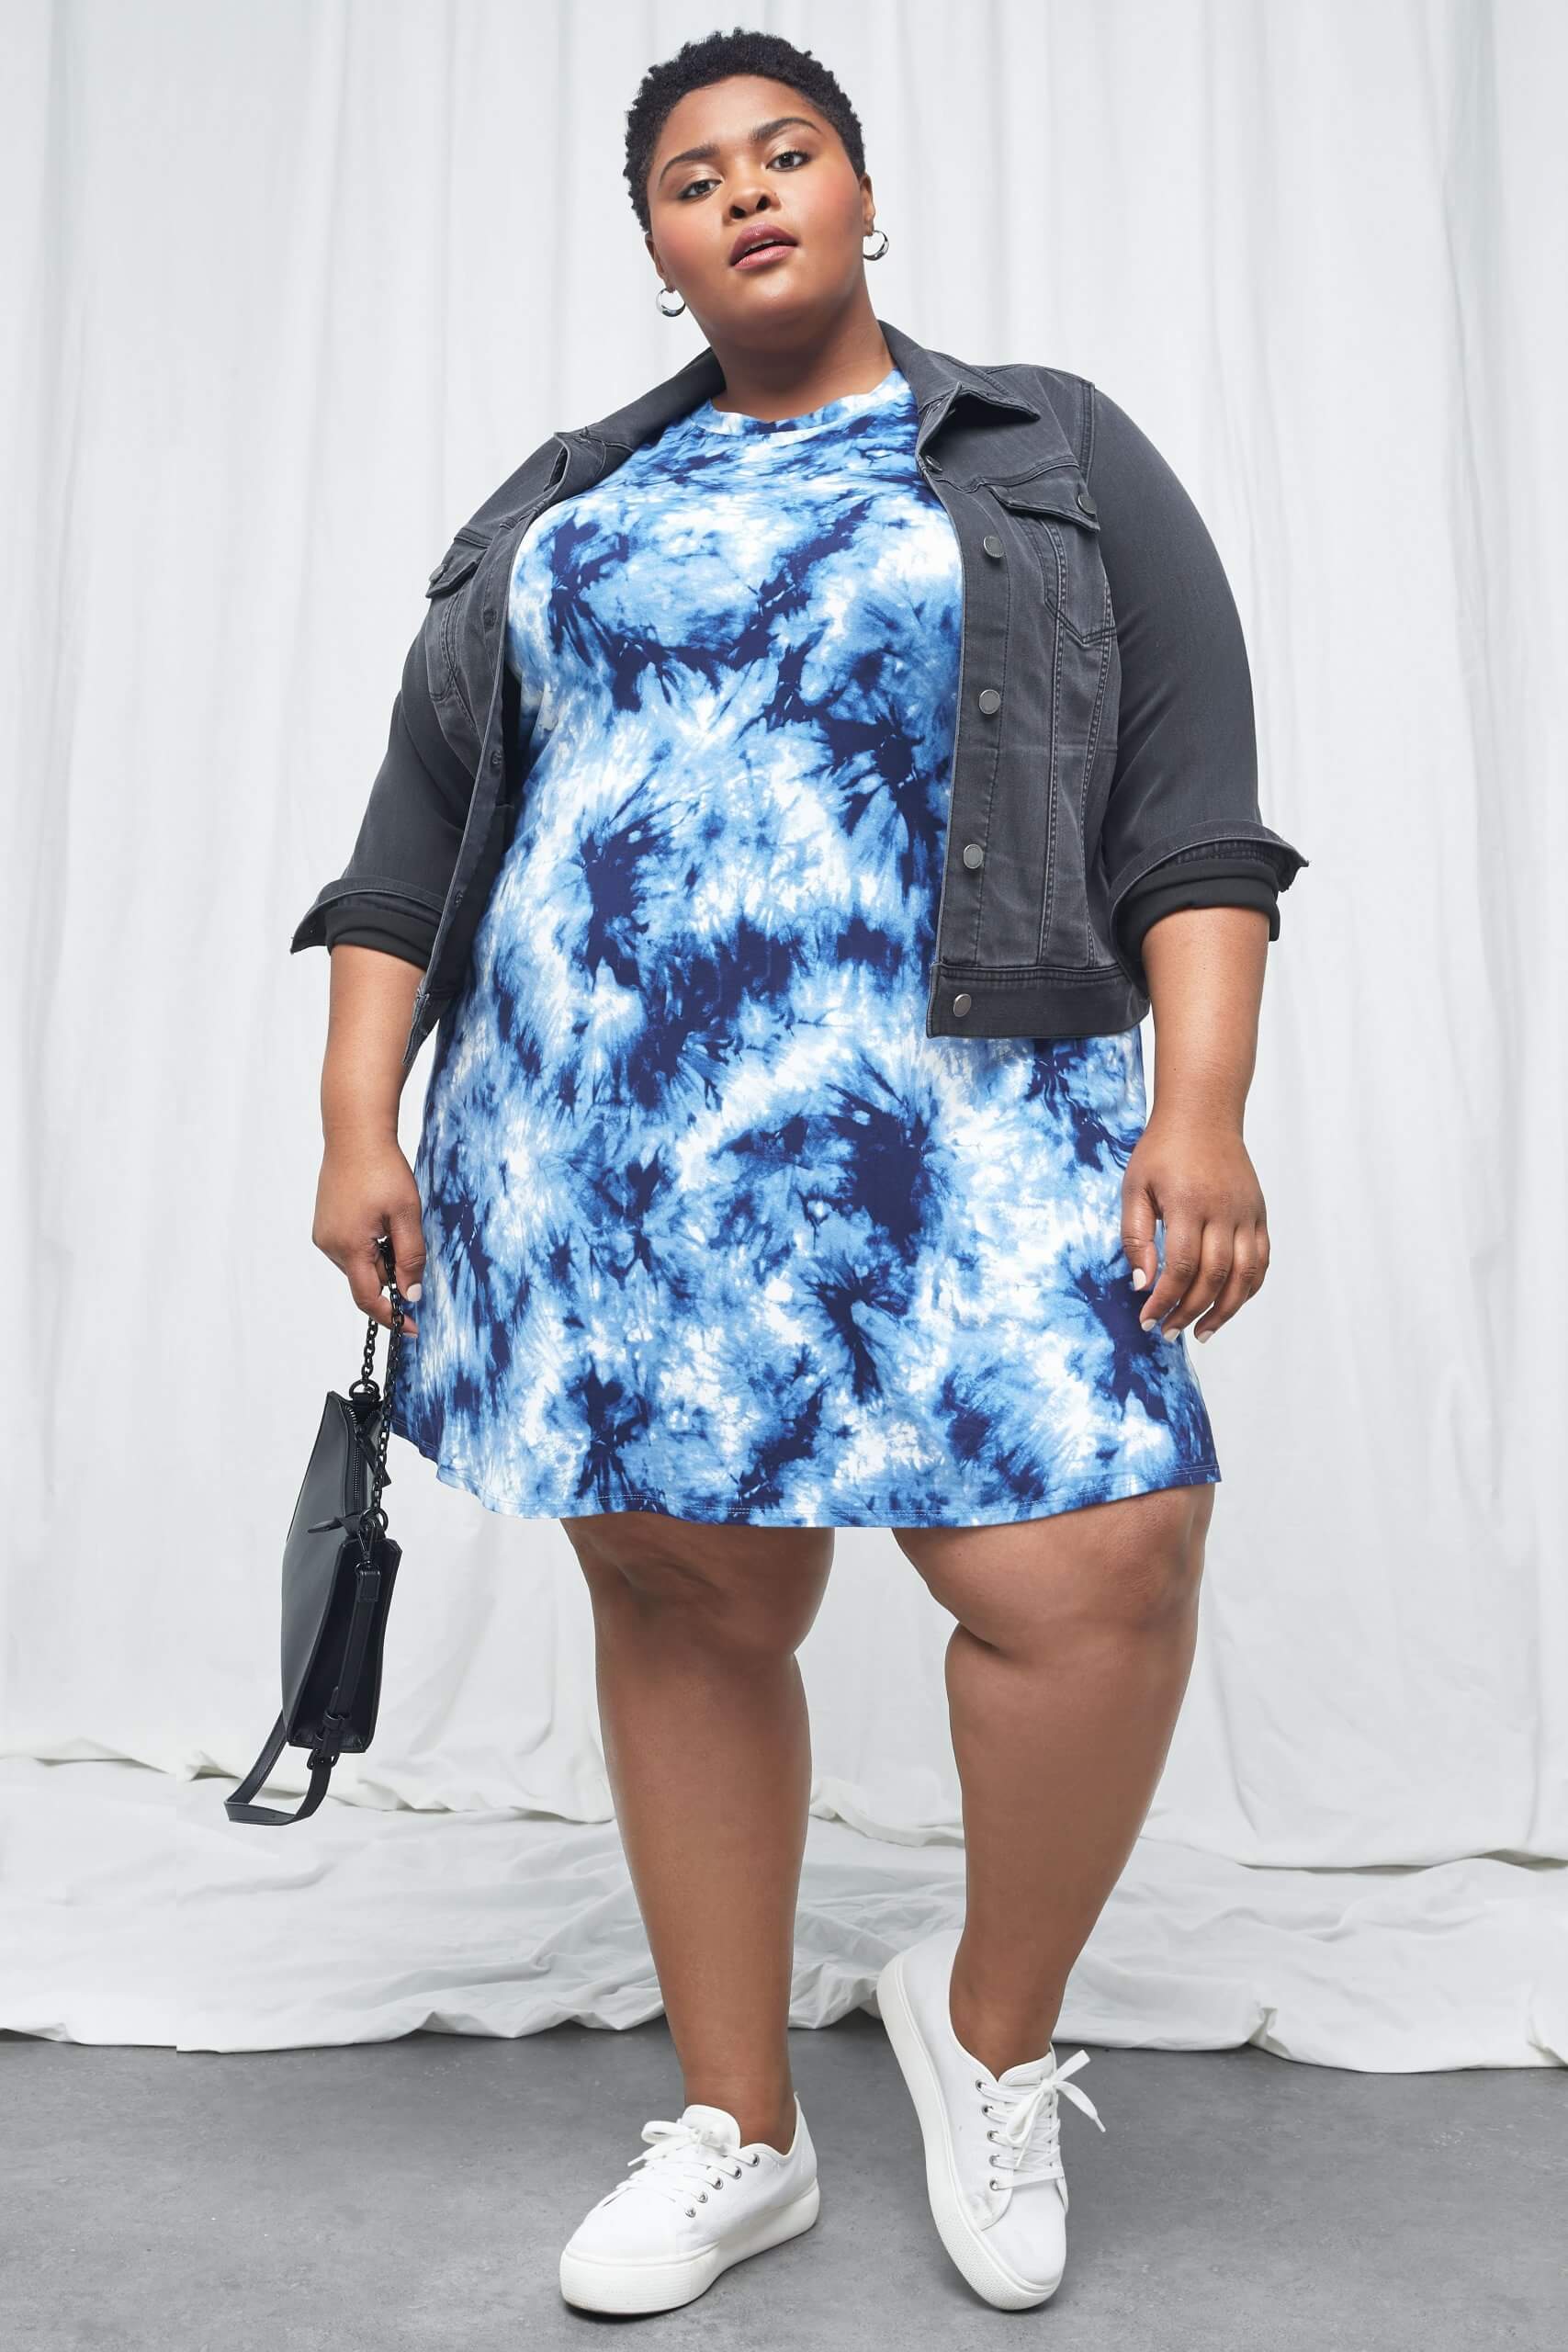 Guide to Dresses for Plus Sized Women